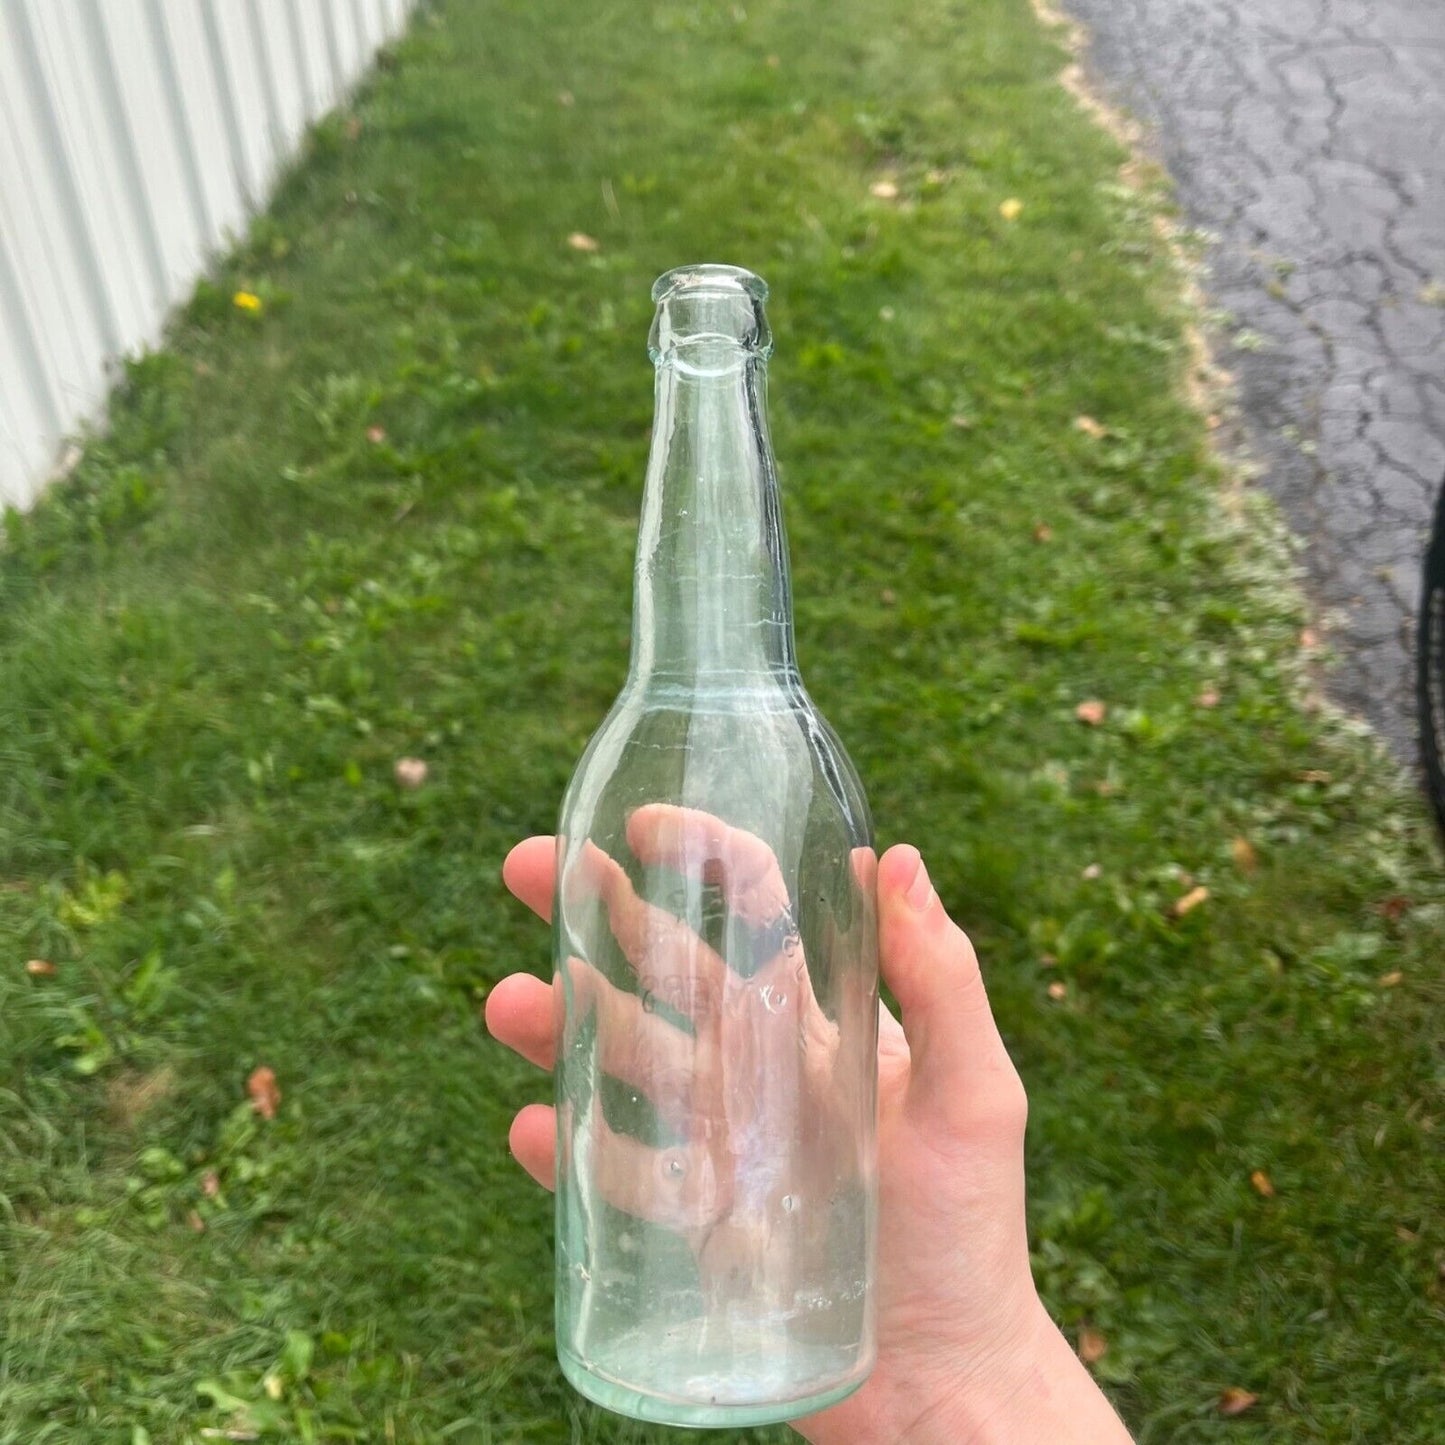 Pre-Prohibition J. Steger & Co Brewers Mayville Wis Clear Beer Bottle WIS